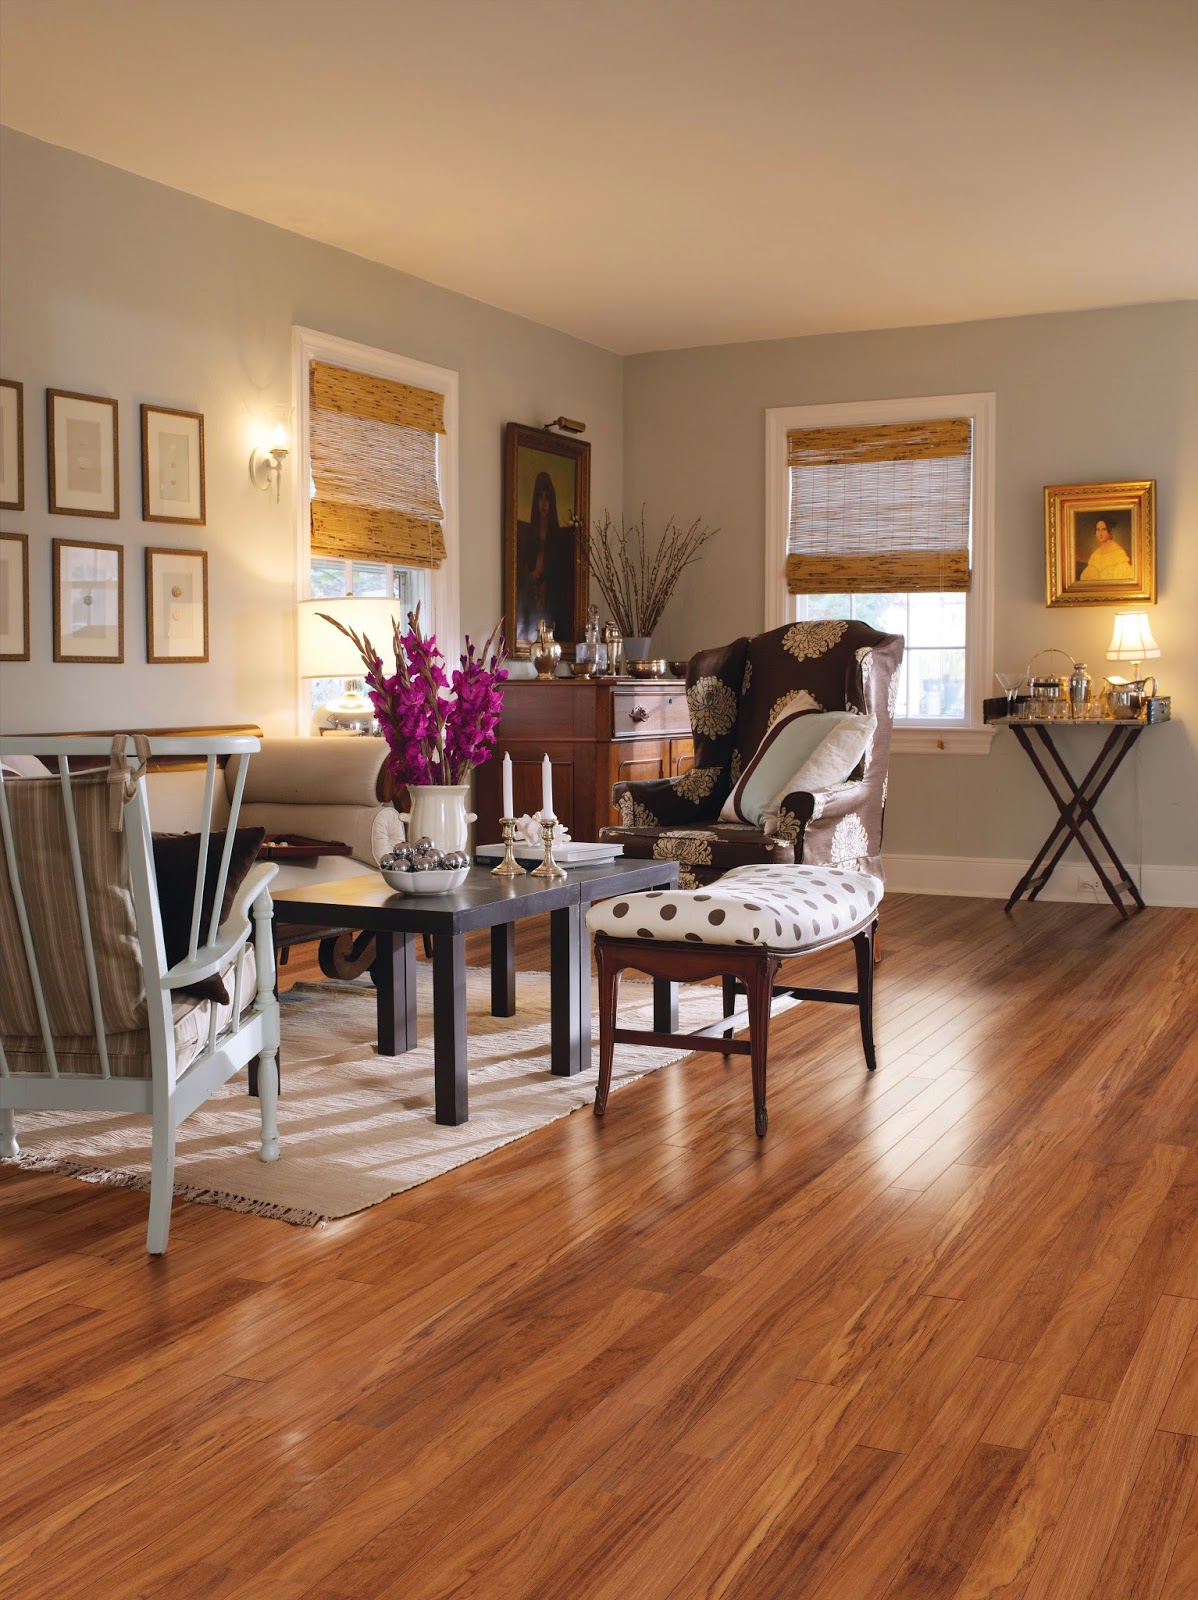 What are some things to look for when buying hardwood flooring?